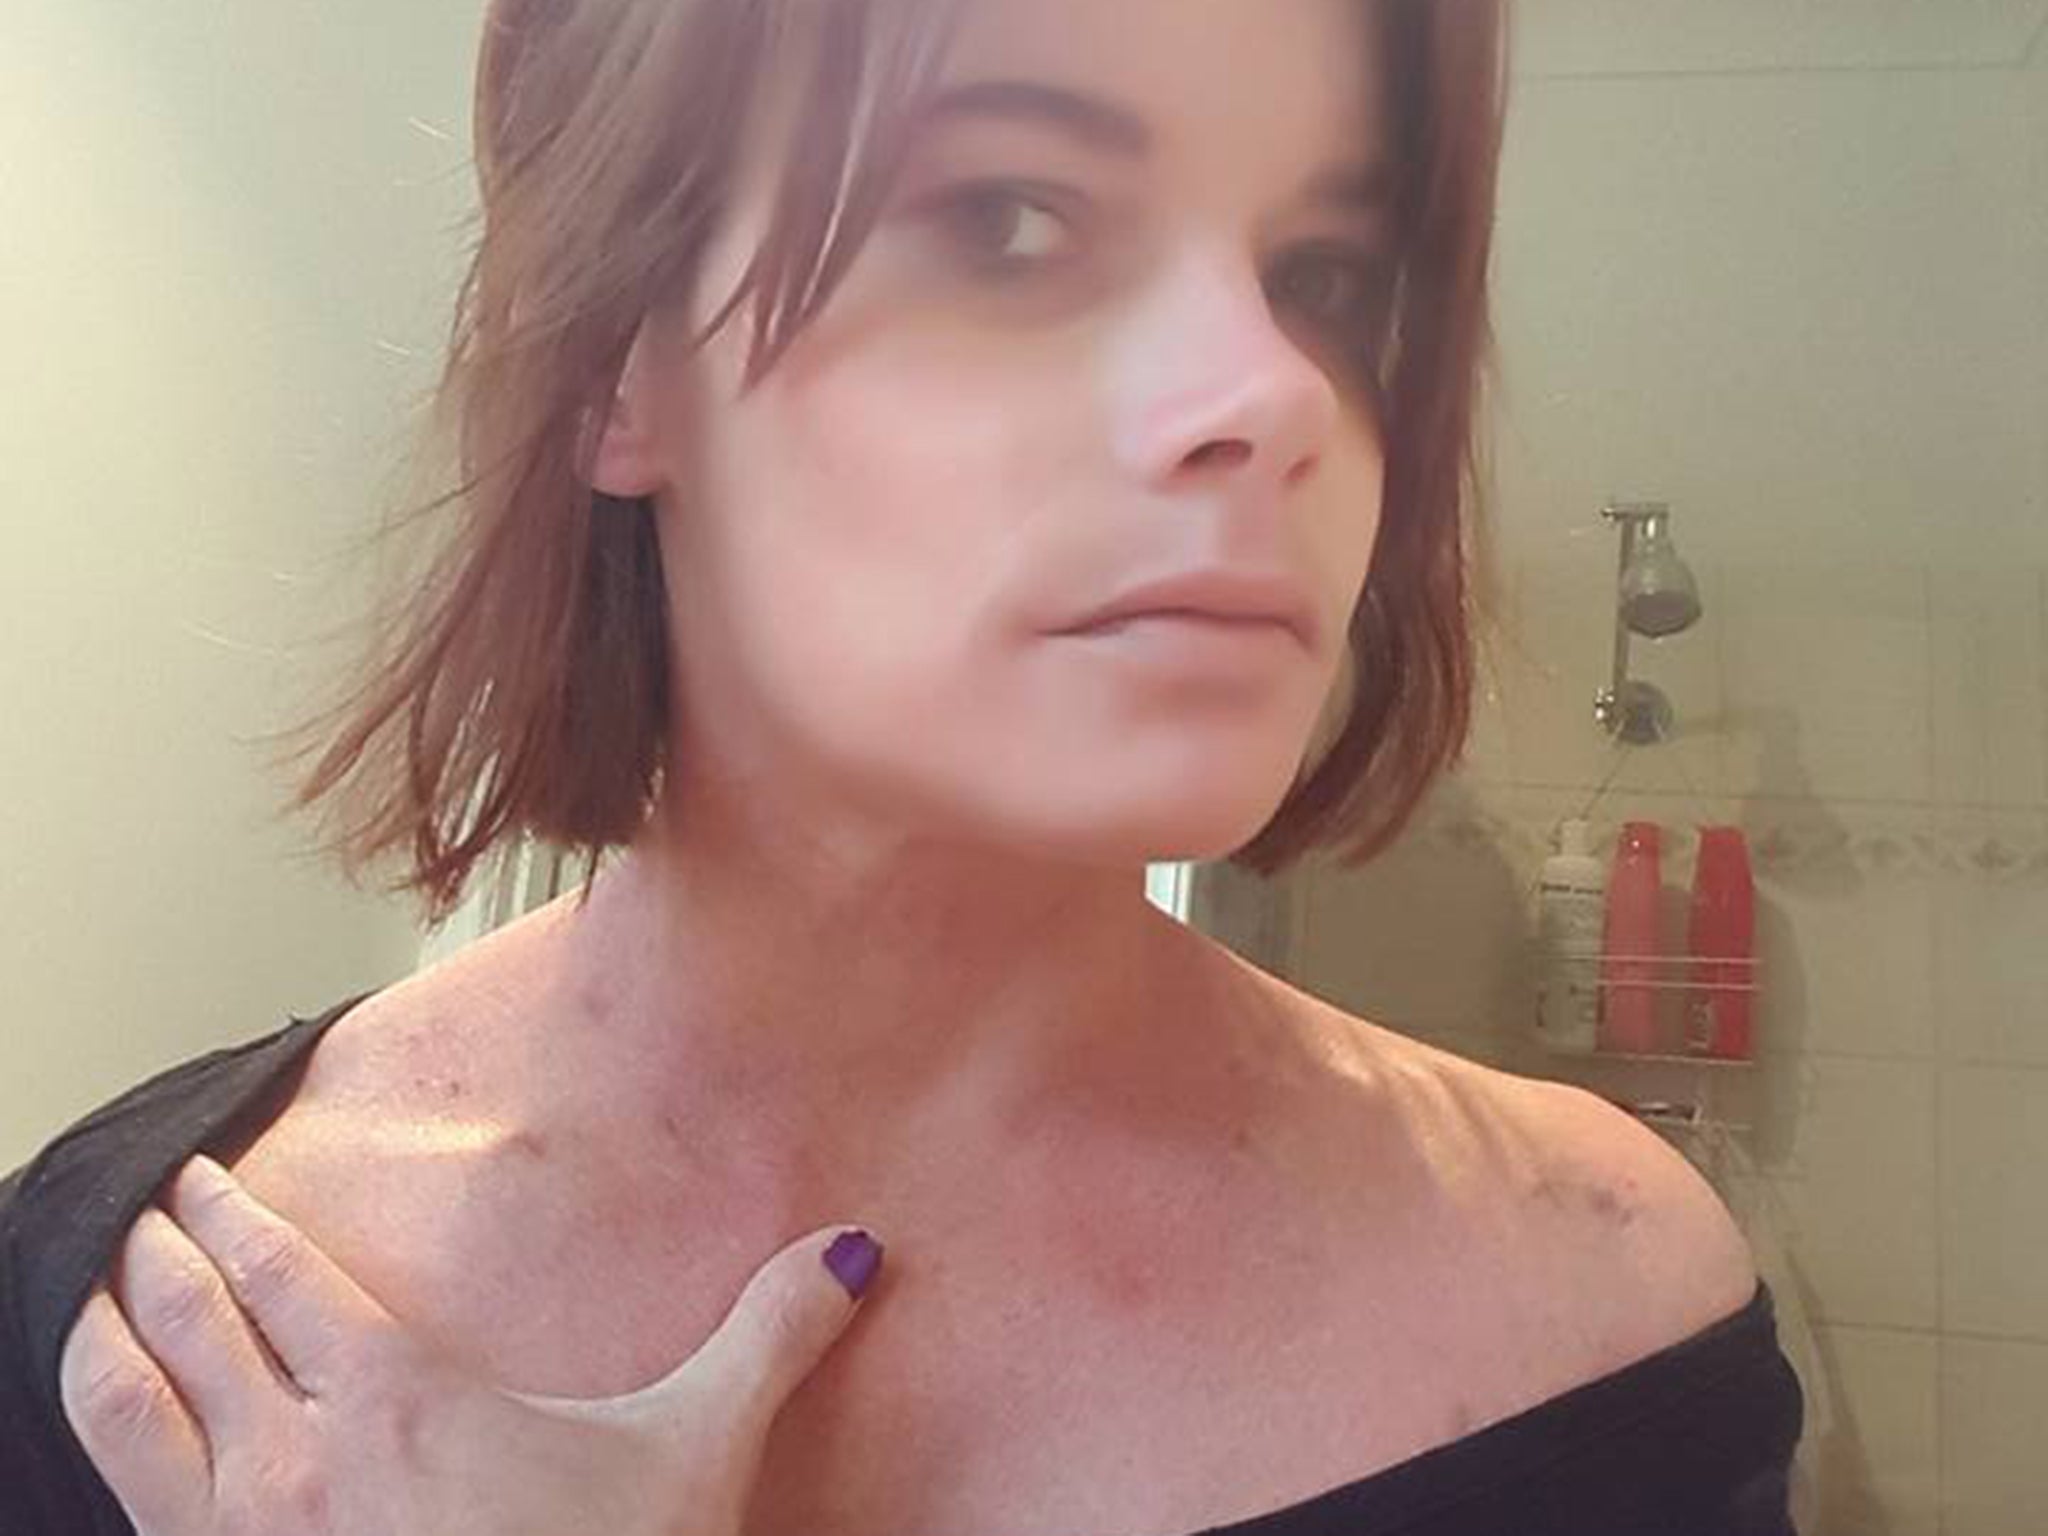 Photos show bruising on Ms Berry's collar bone, as well has her arms, thighs and breasts